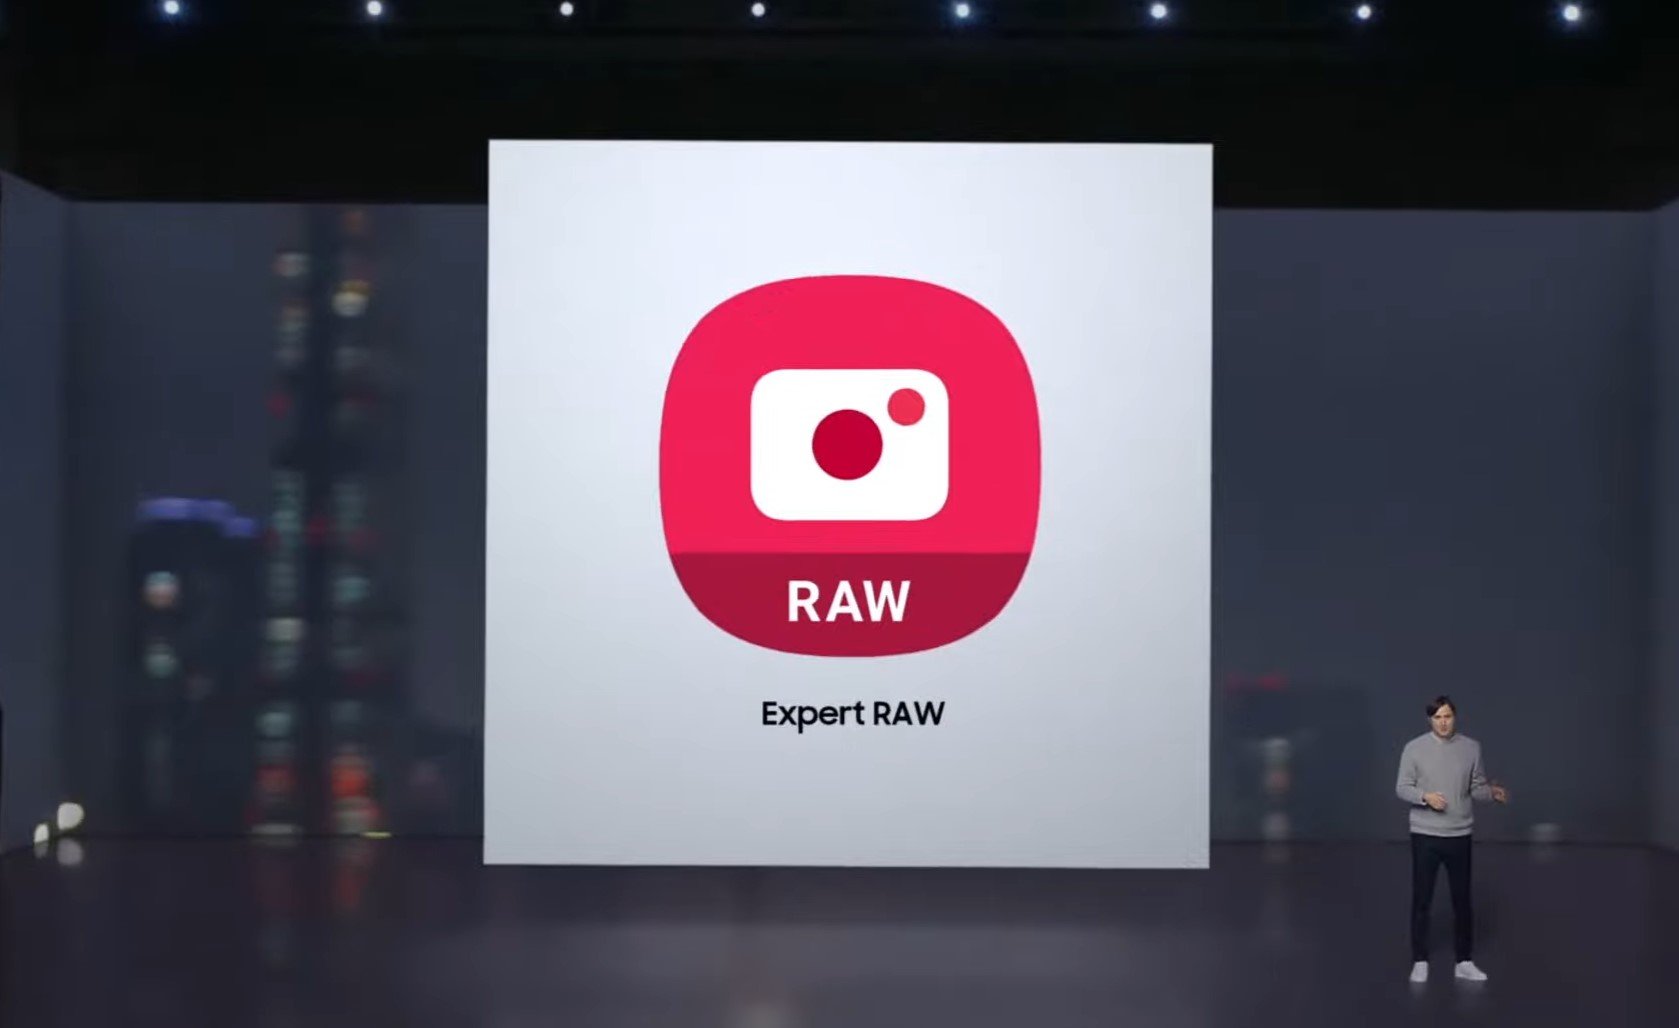 Samsung Adds More Galaxy Handsets That Support Expert RAW App